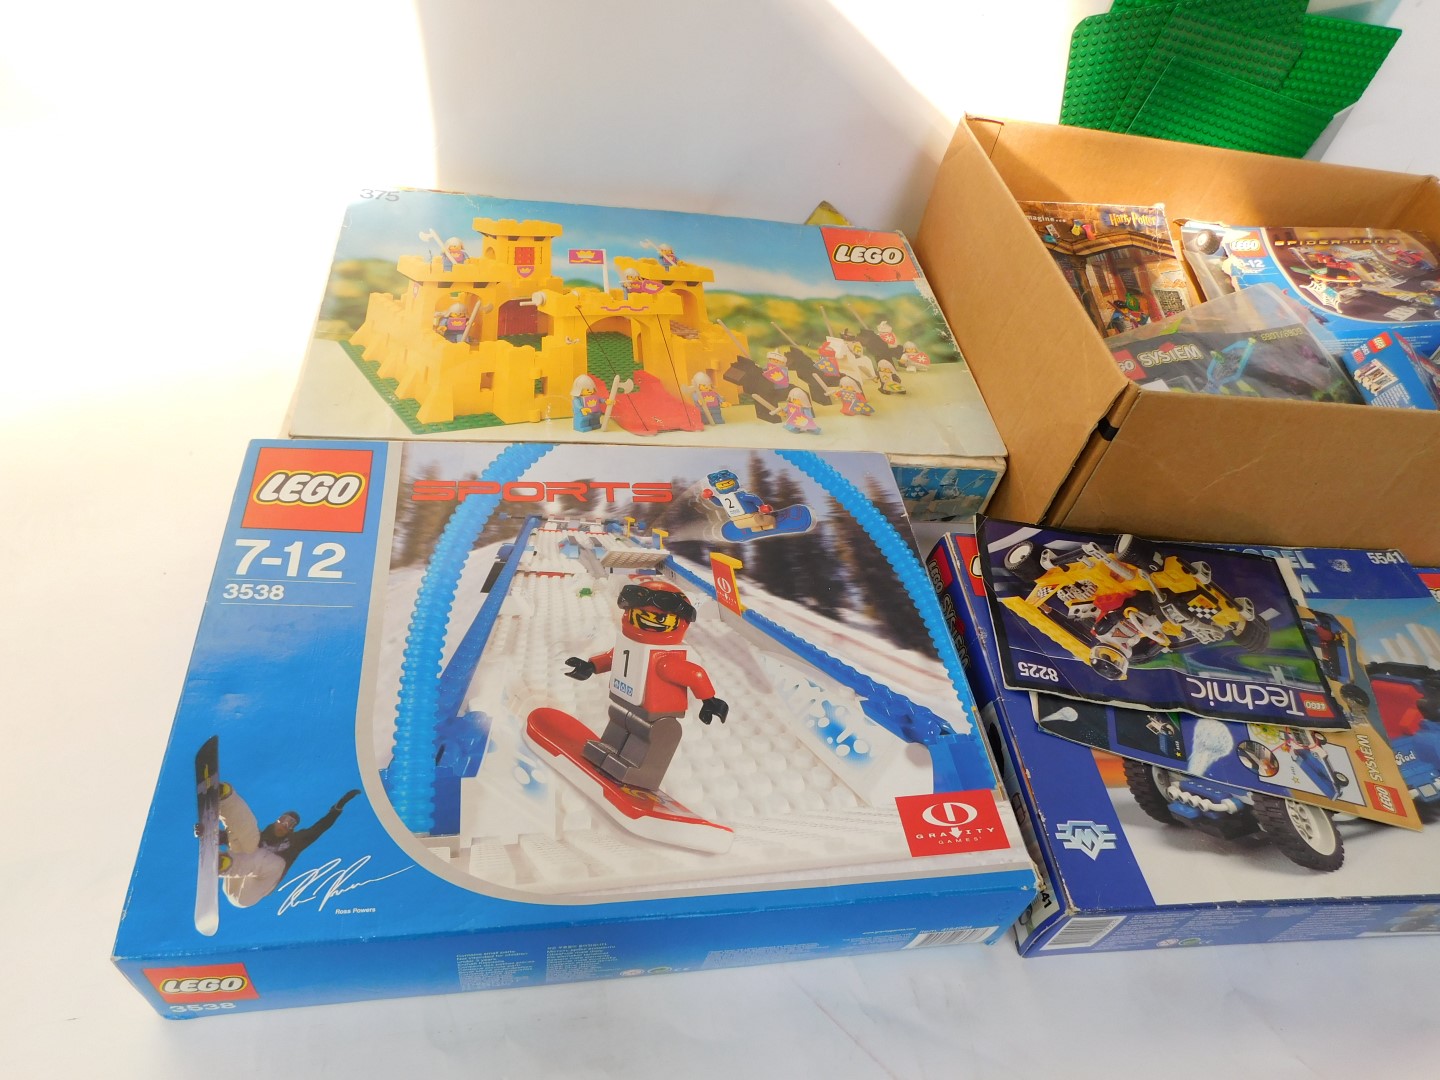 Lego boxed sets, unchecked, comprising sports 3538, system police set 6545, model team 5541 and buil - Image 2 of 3